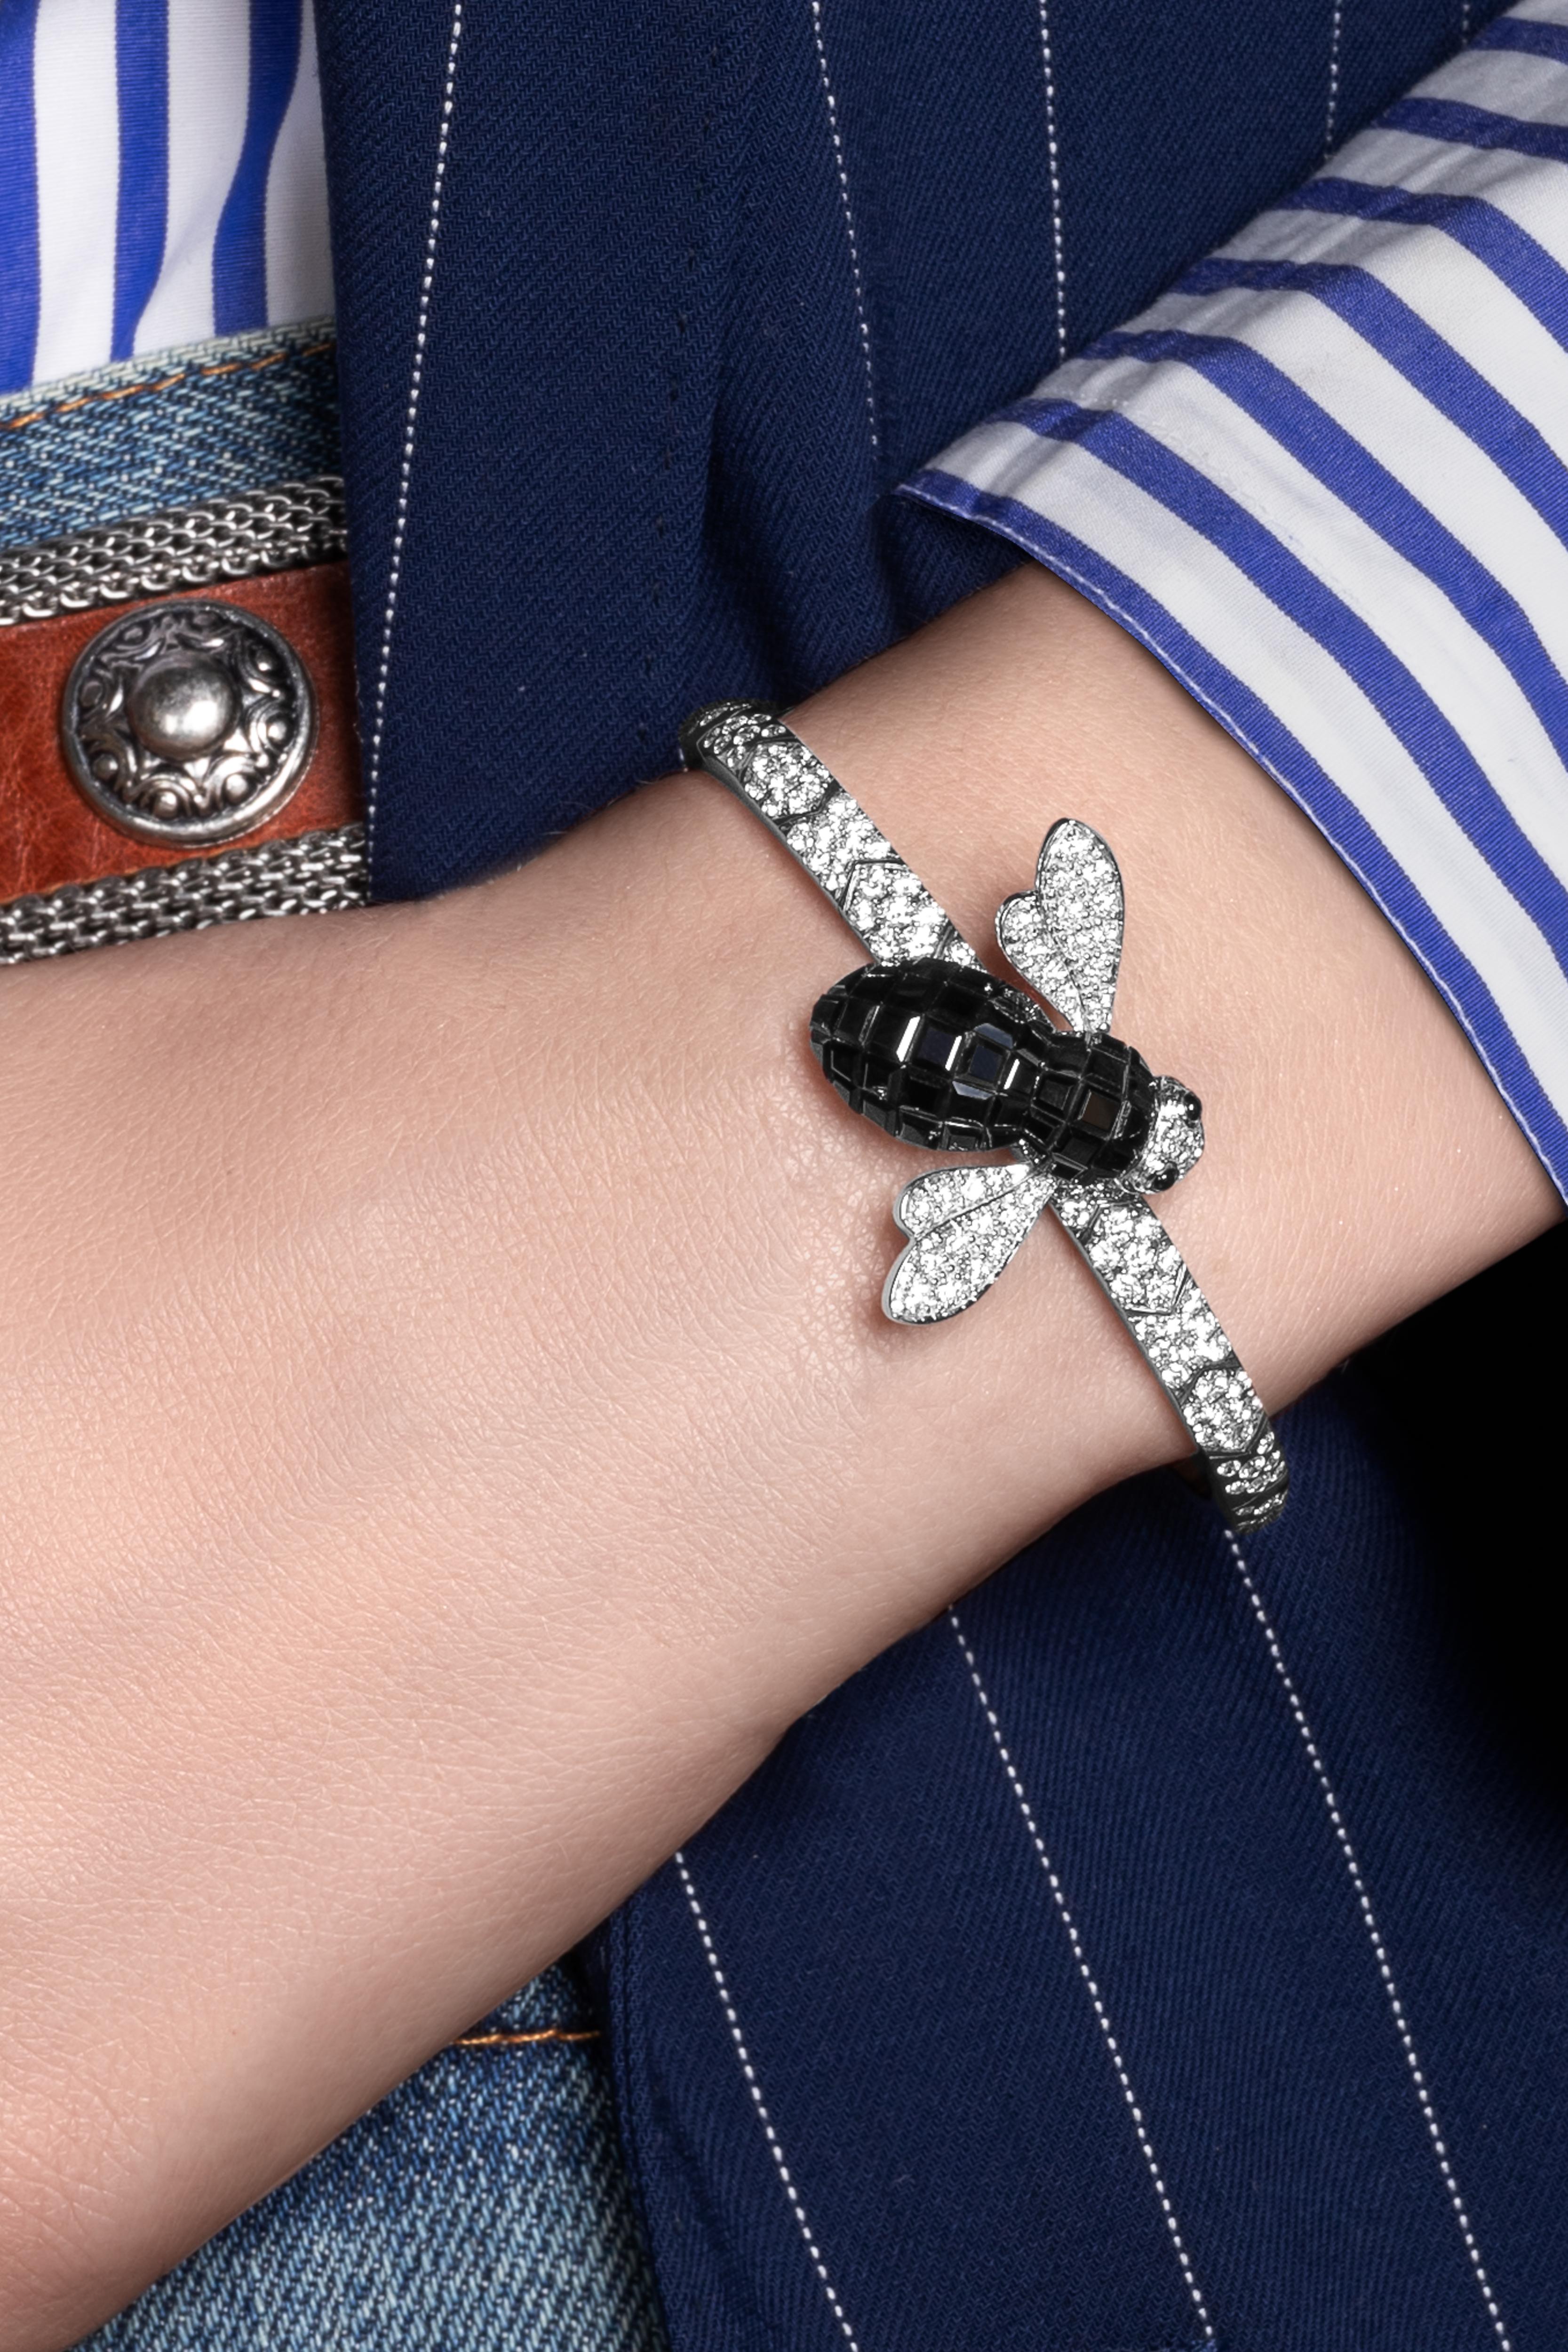 Titanium diamond bangle, white gold and diamond and invisible setting black sapphires bee motif.
The titanium bracelet has a spring inside which makes it flexible and adapts to every wrist size.
The Bee Brooch, originally designed by Alberto